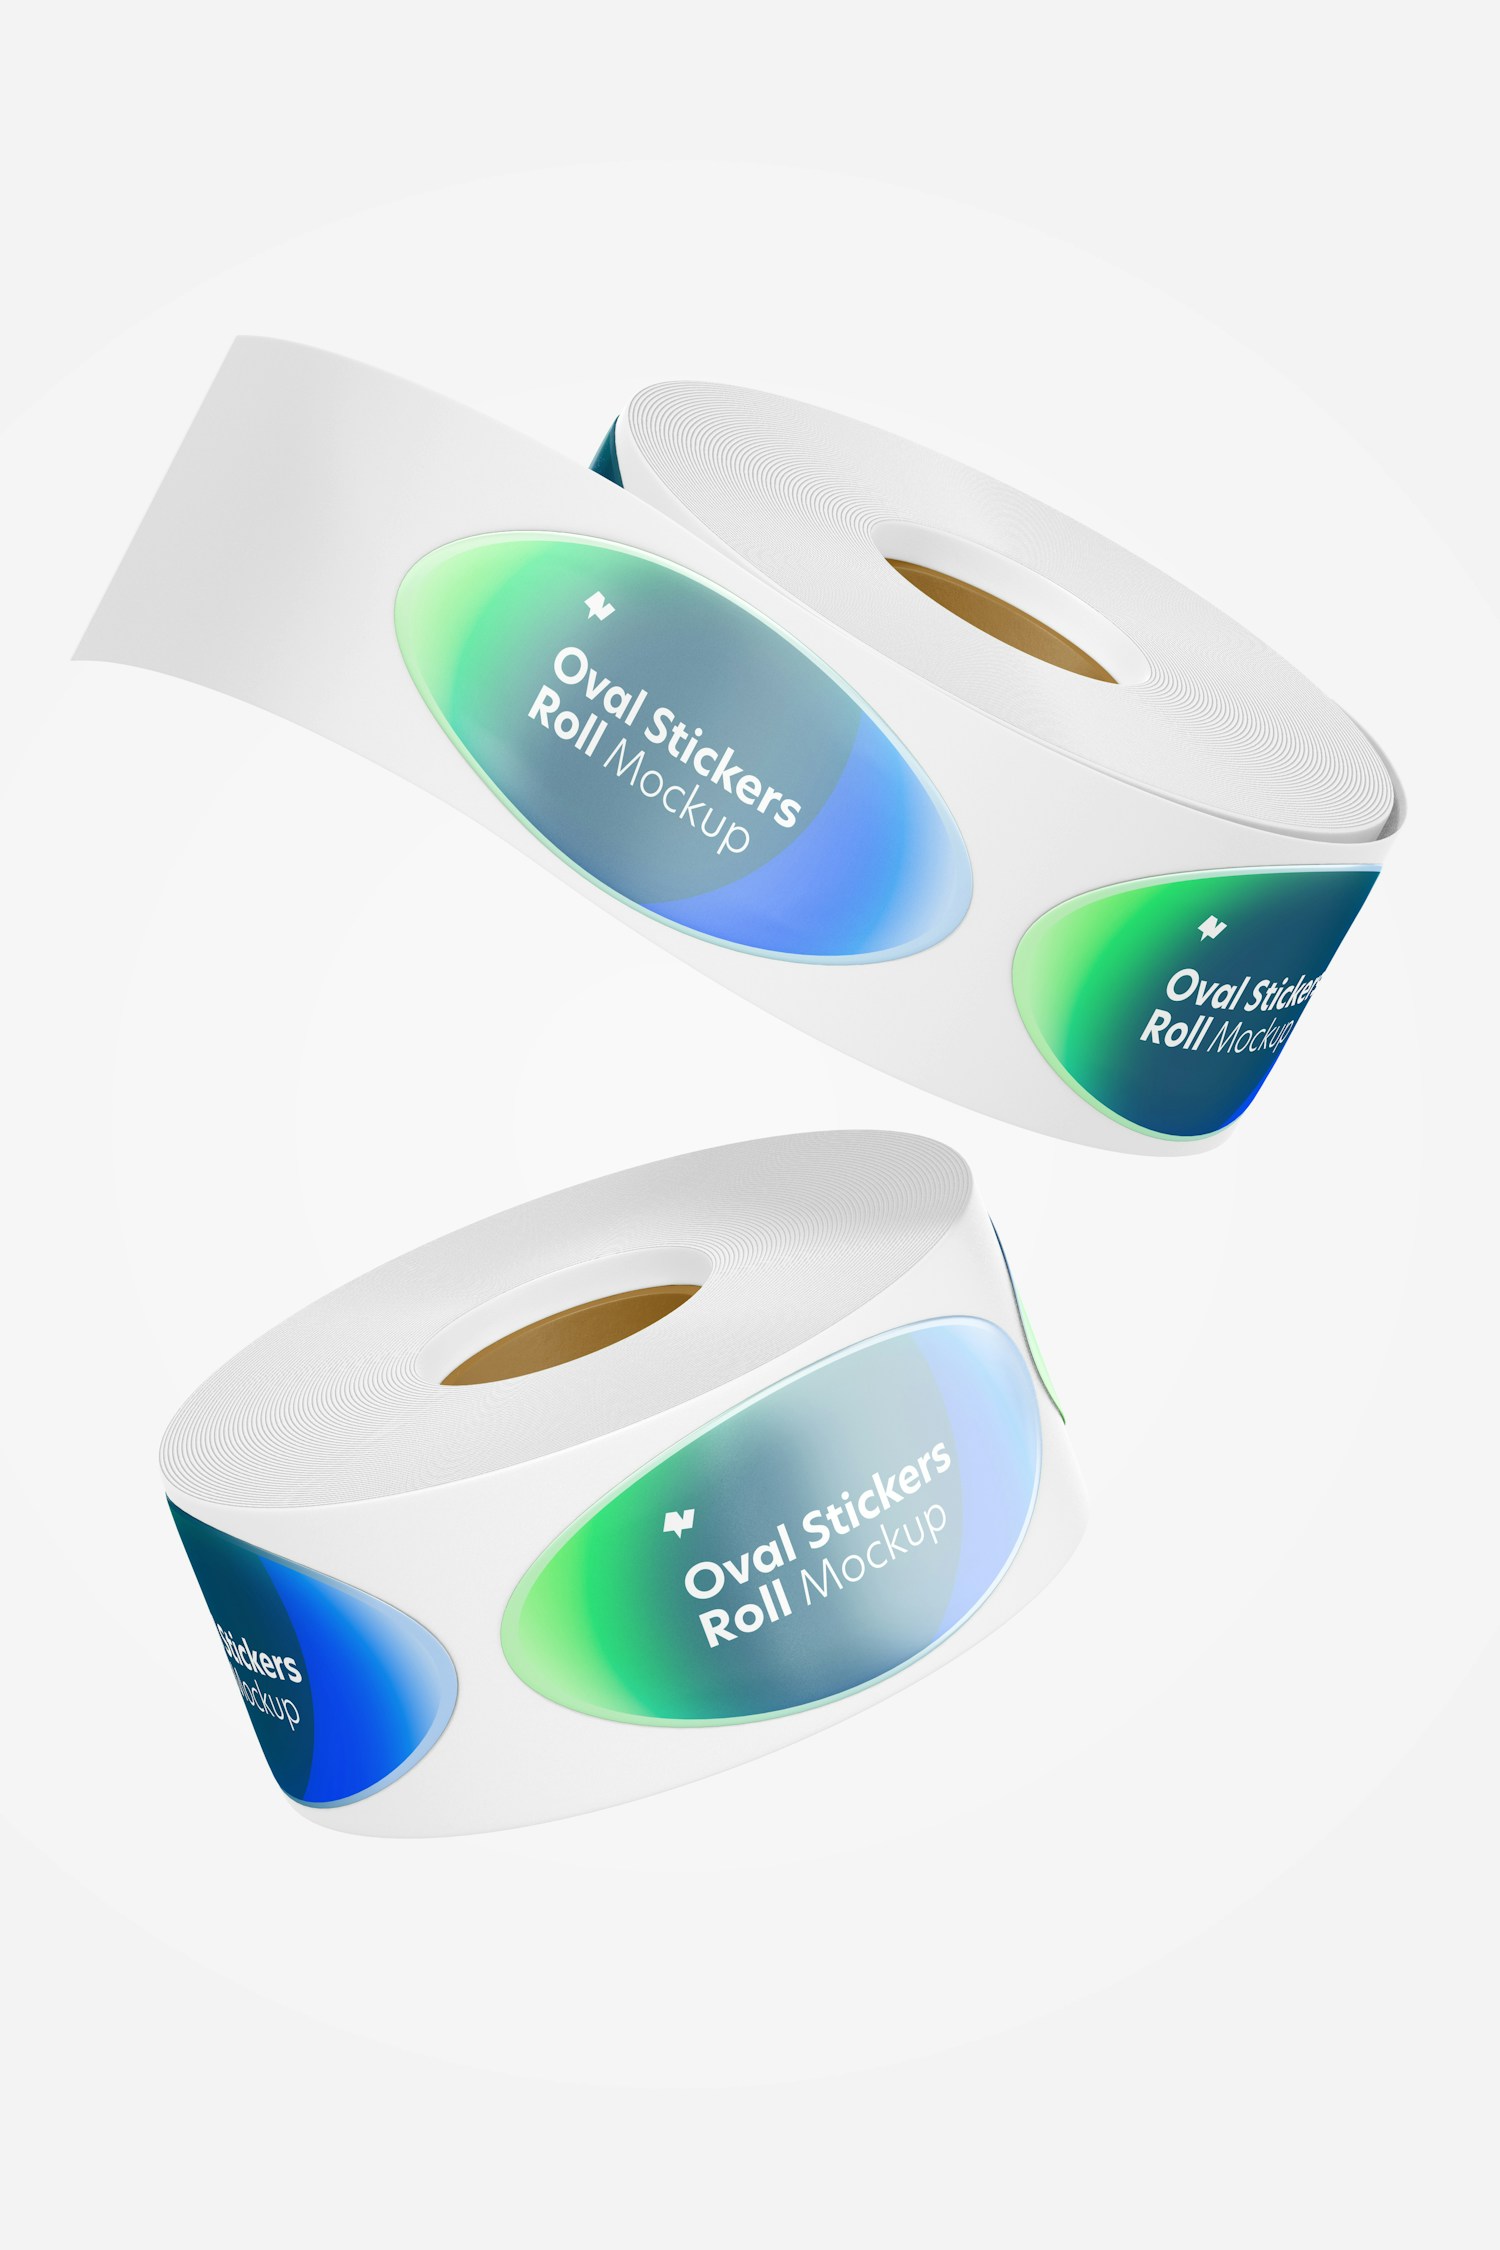 Oval Stickers Rolls Mockup, Floating